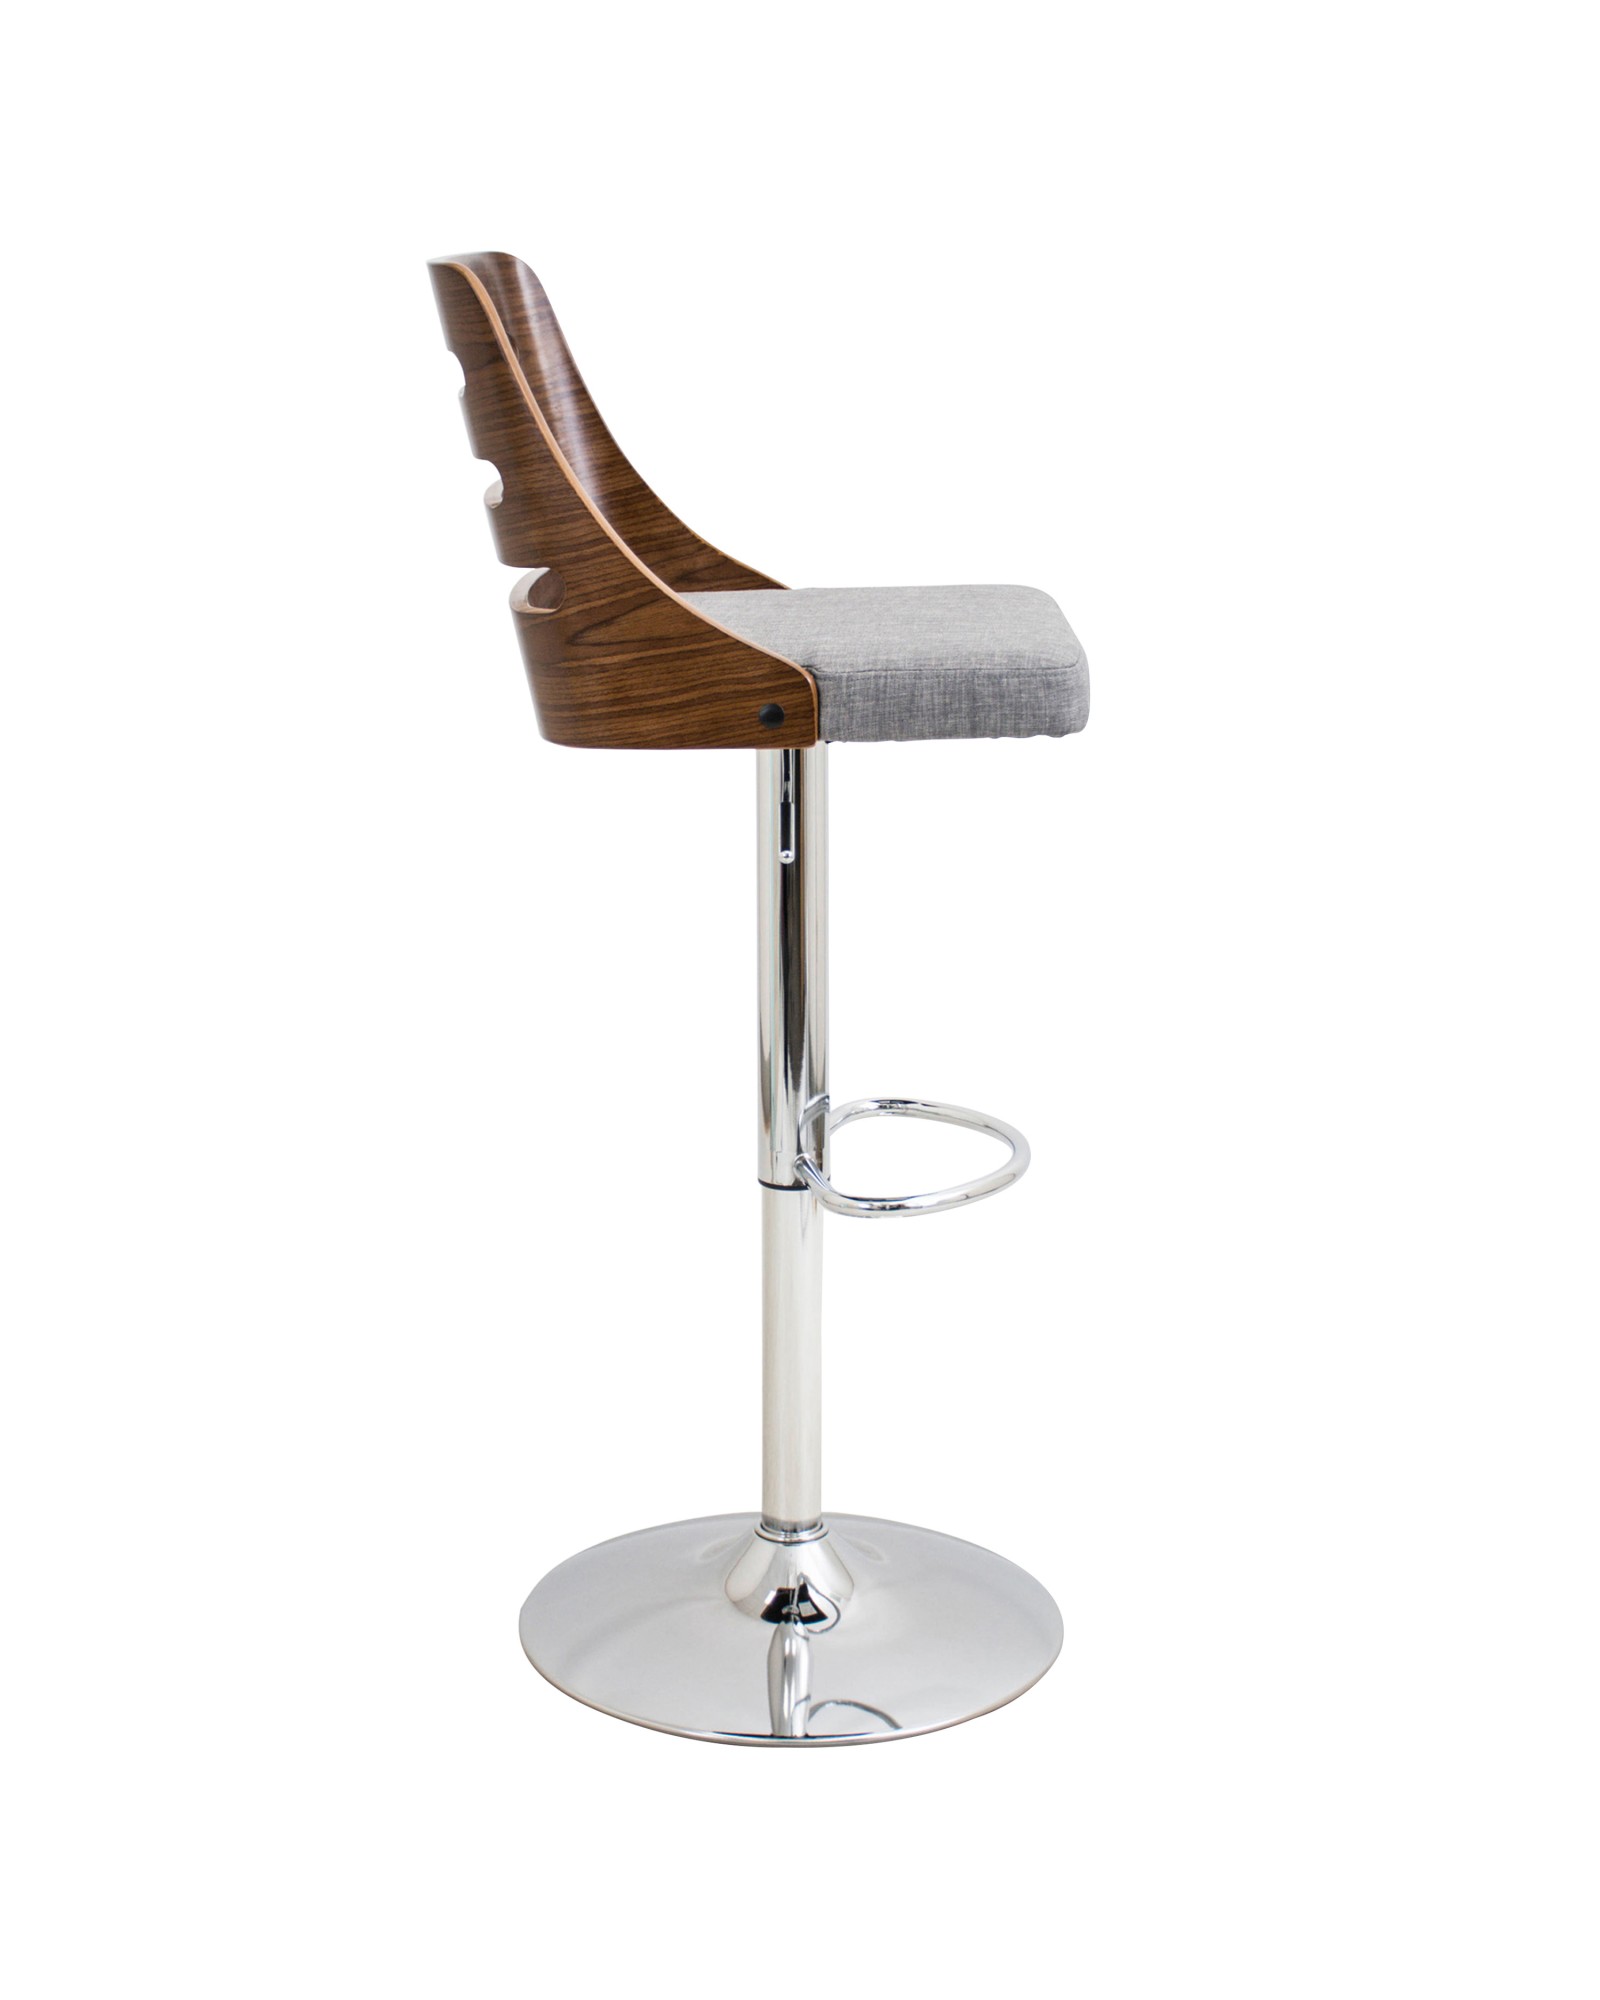 Trevi Mid-Century Modern Adjustable Barstool with Swivel in Walnut and Grey